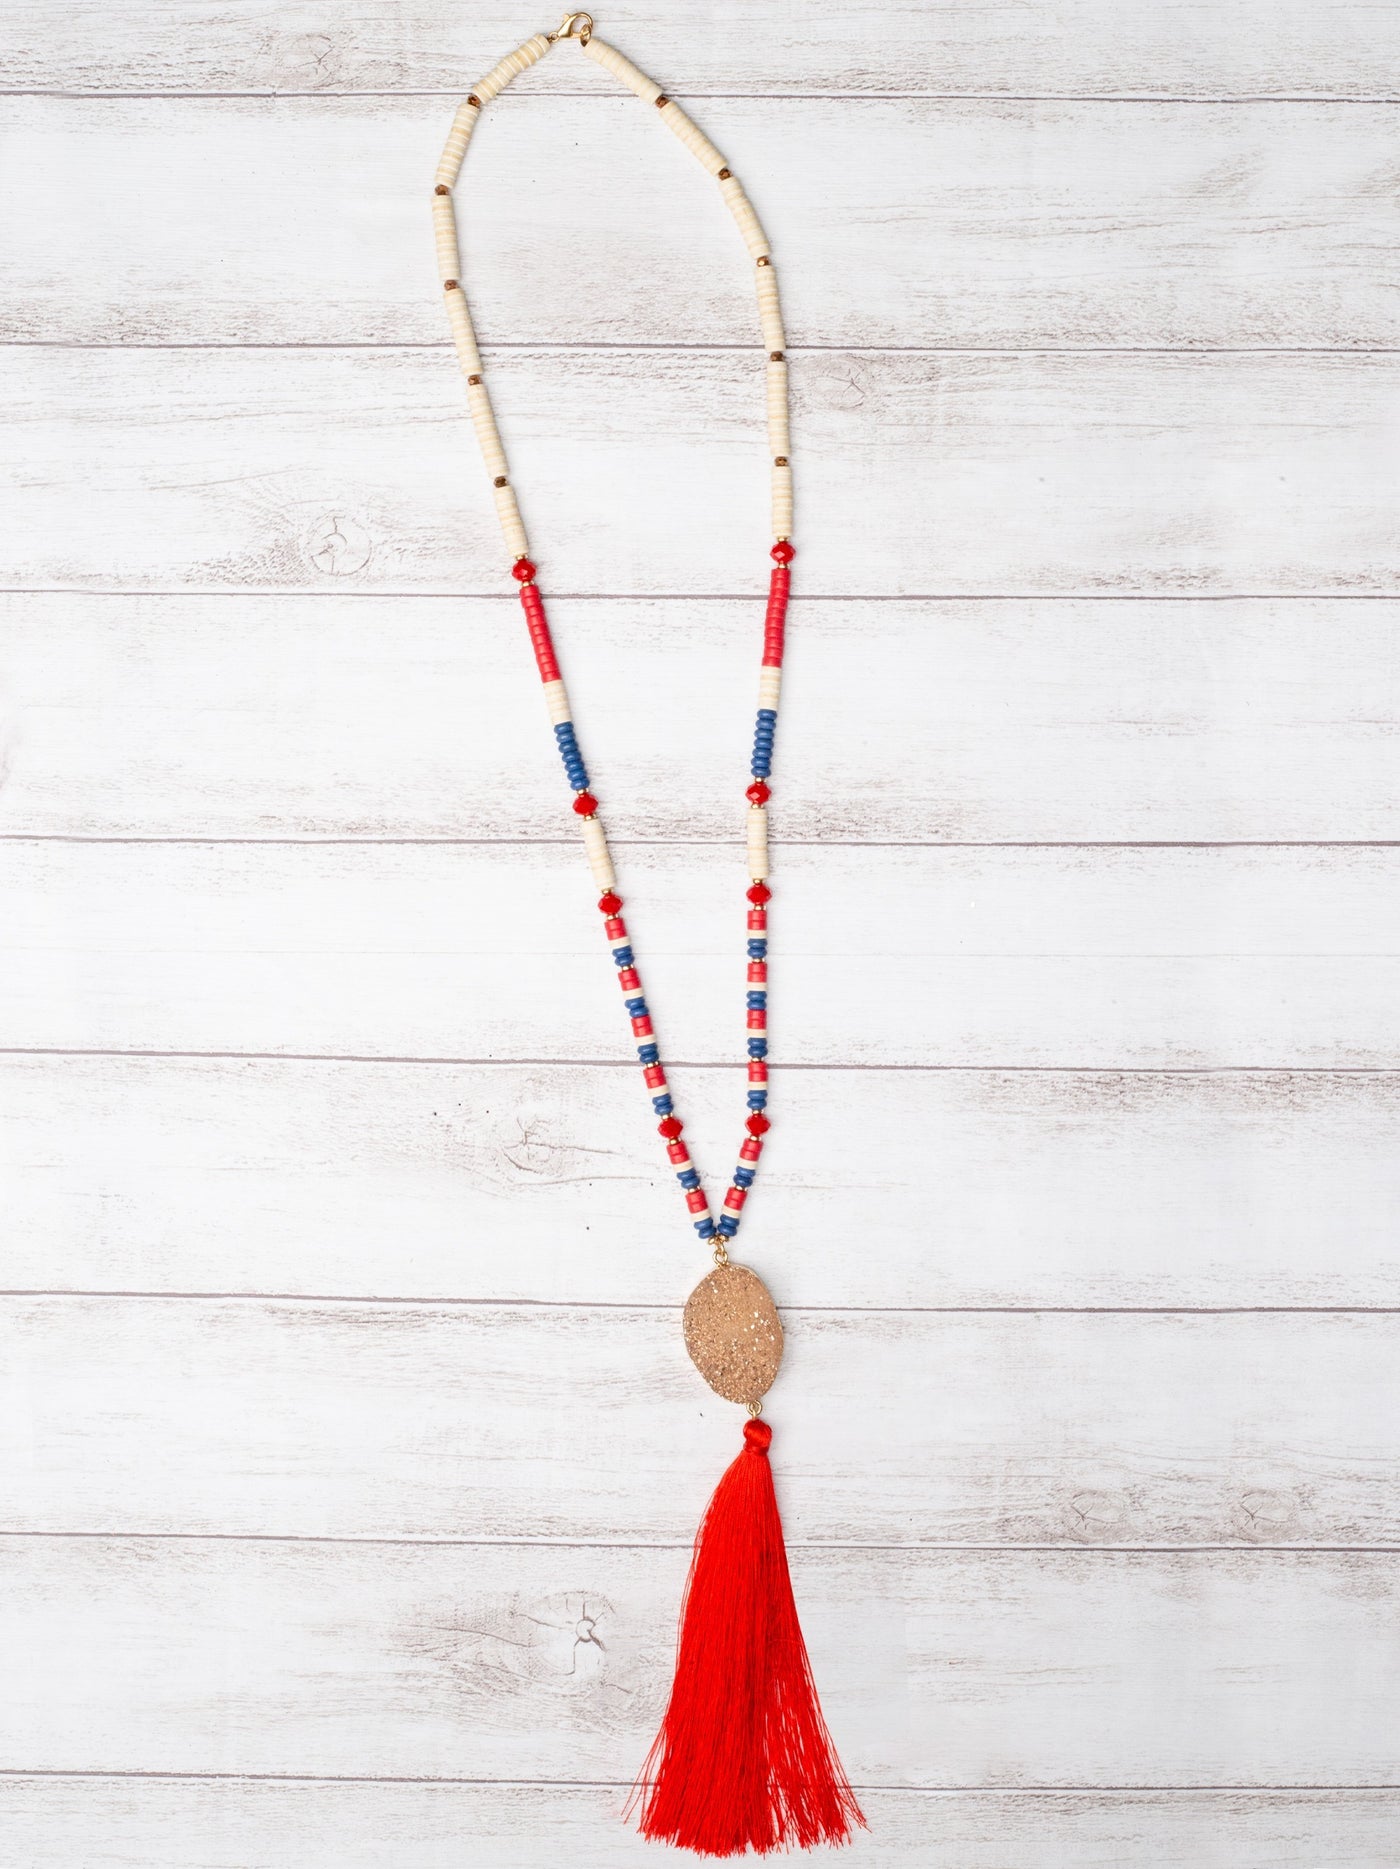 GOOD TIMES AND TAN LINES ROSE GOLD DRUZY STONE PENDANT WITH RED TASSEL ON A MIXED FLAT BEADED NECKLACE